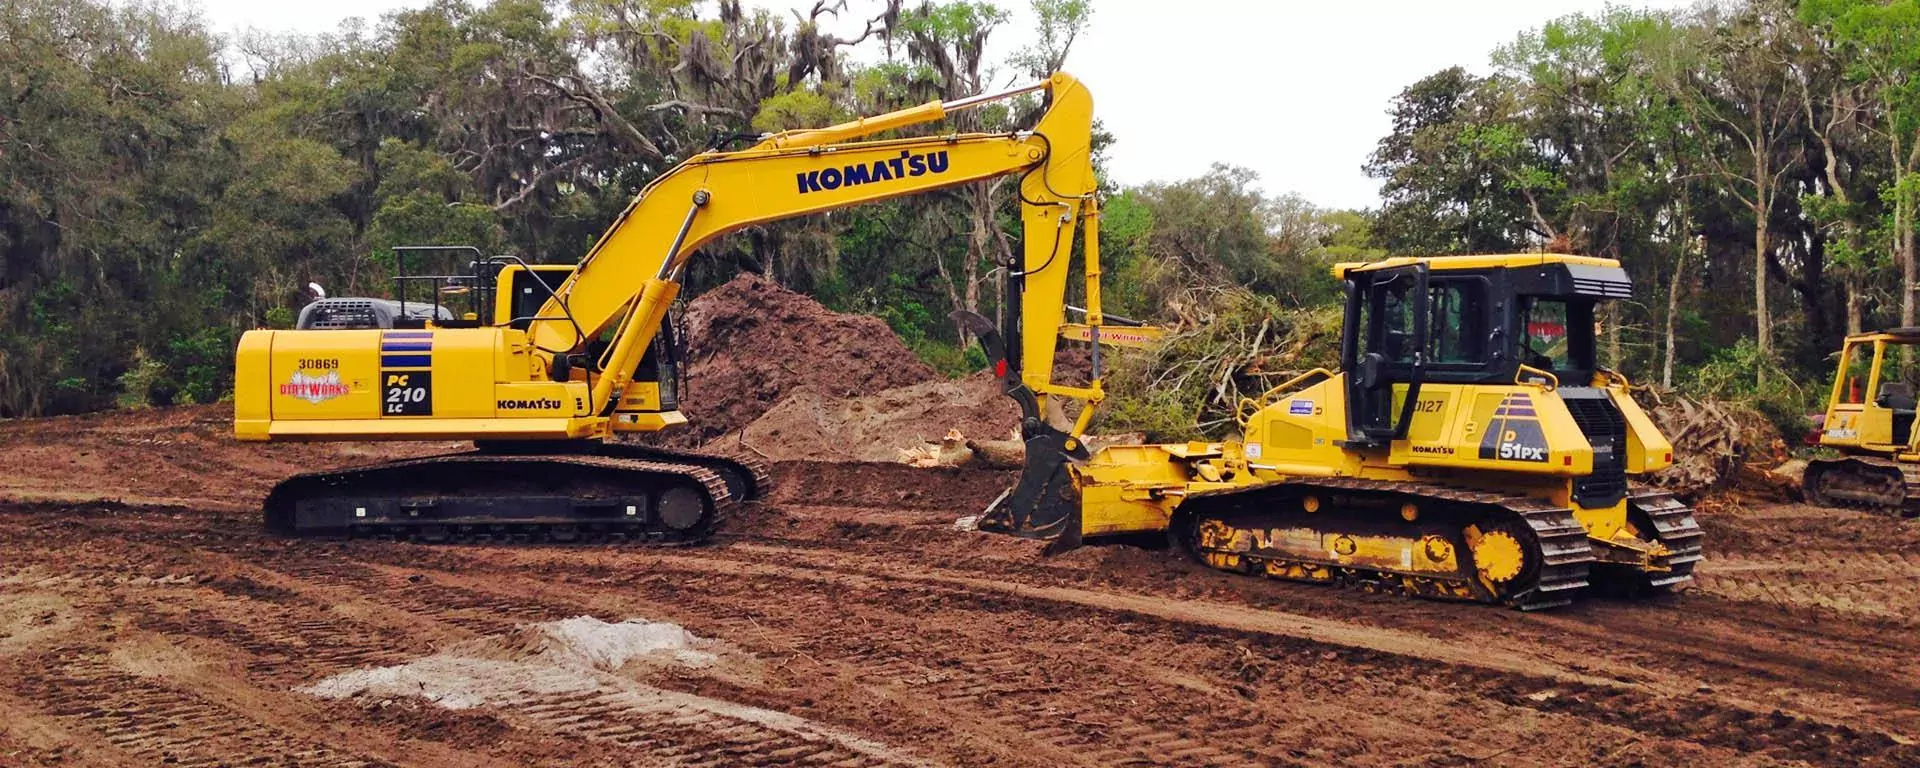 Land clearing equipment on a site